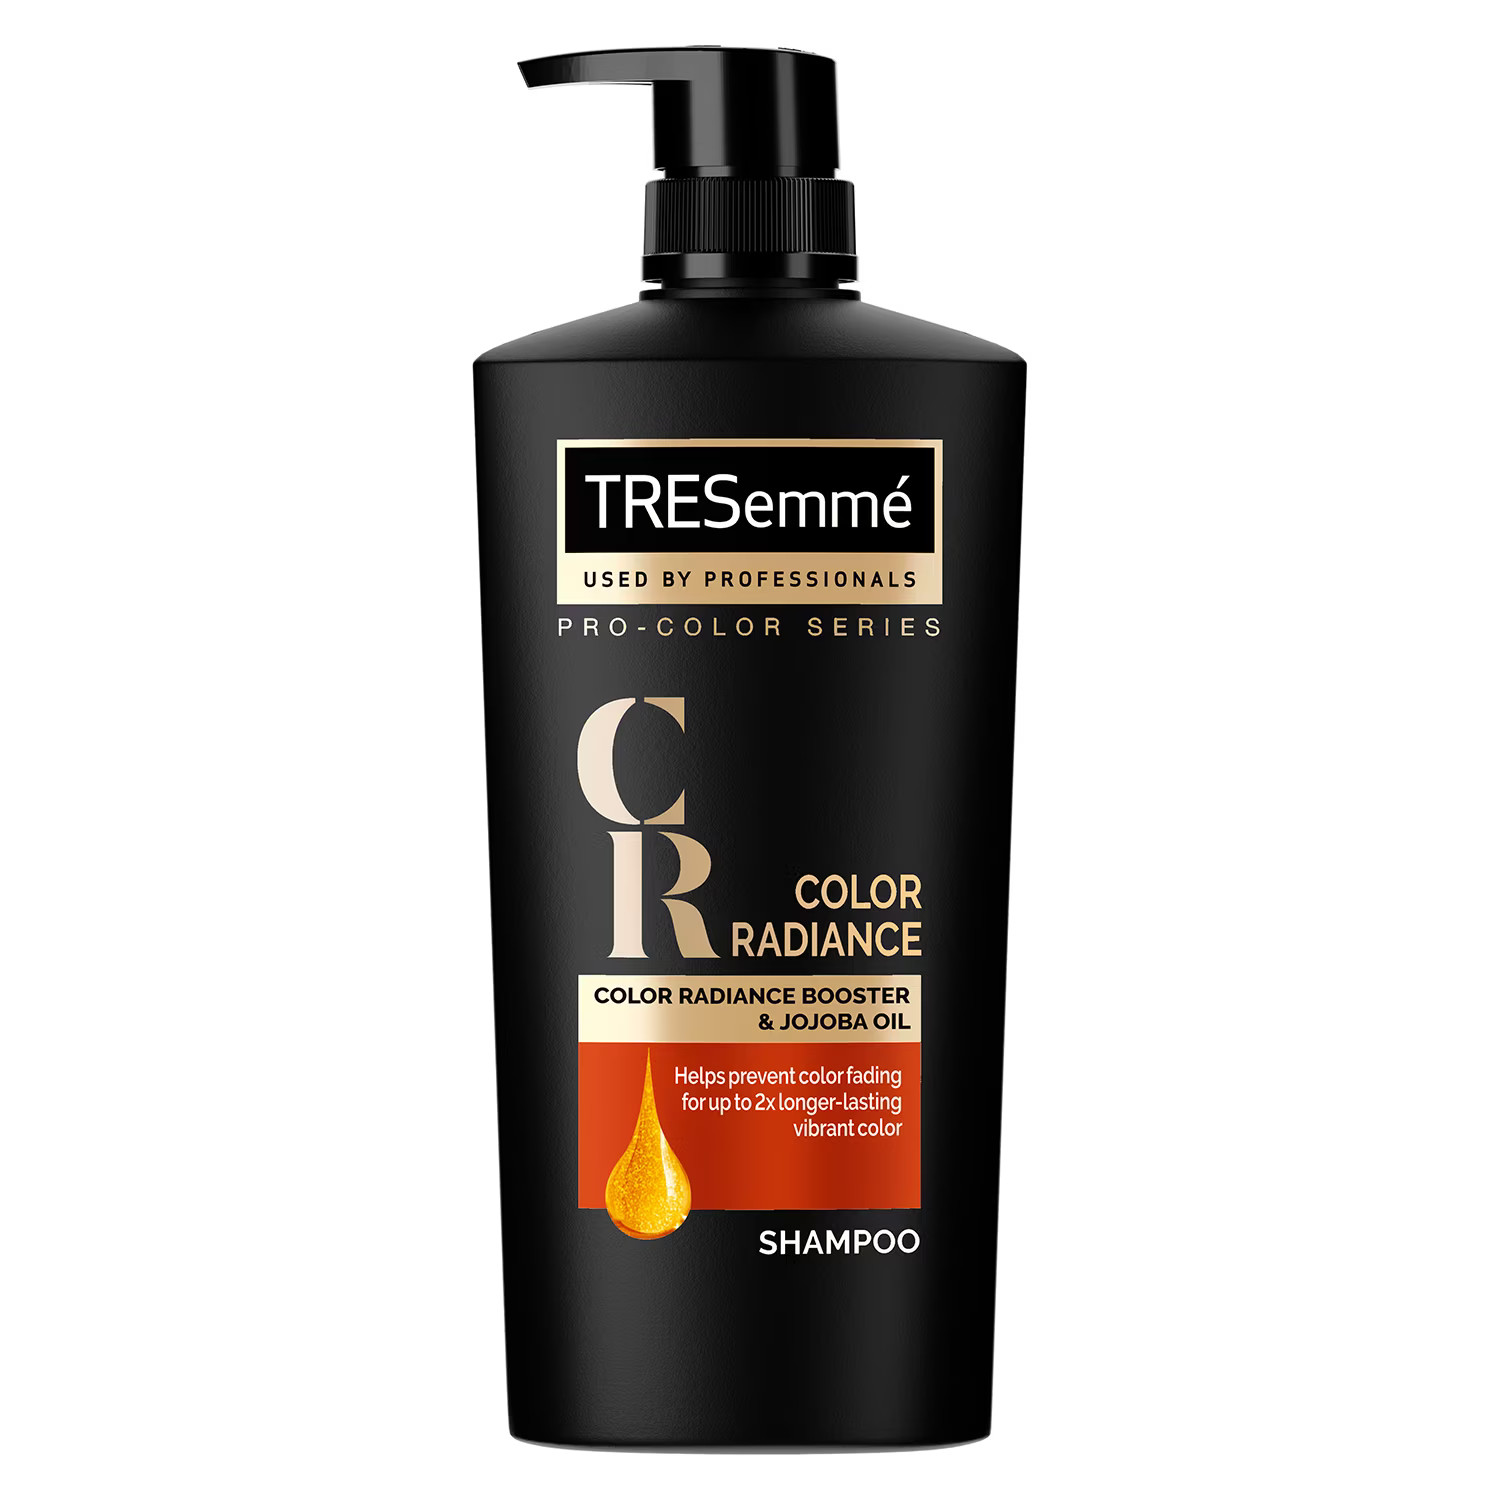 Tresemme Shampoo Color Radiance for Colored Hair